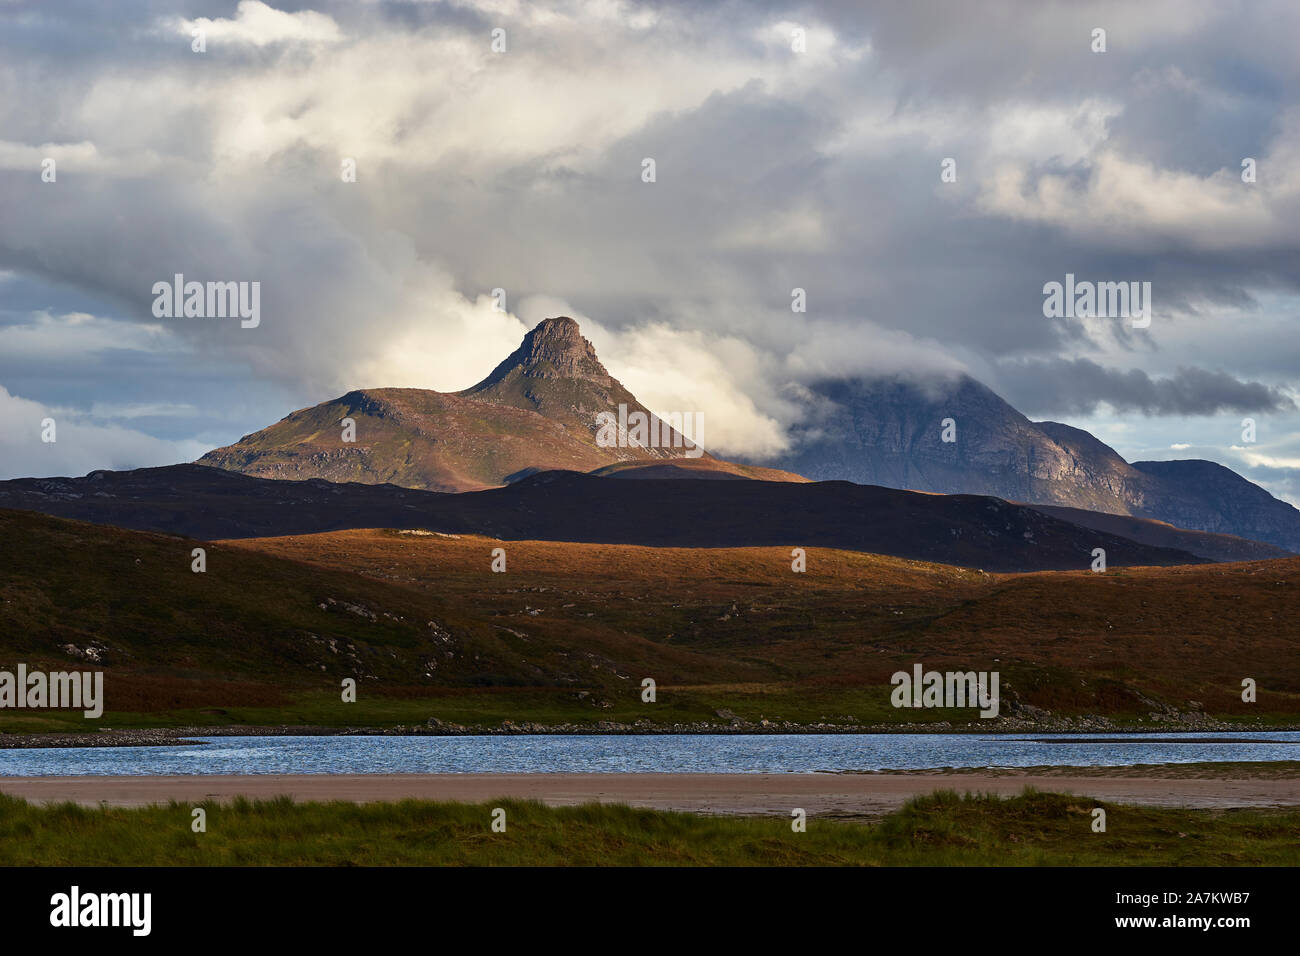 Stac Pollaidh and Cul Beag, Inverpolly.  Viewed from Achnahaird Bay, Wester Ross, Highland, Scotland Stock Photo